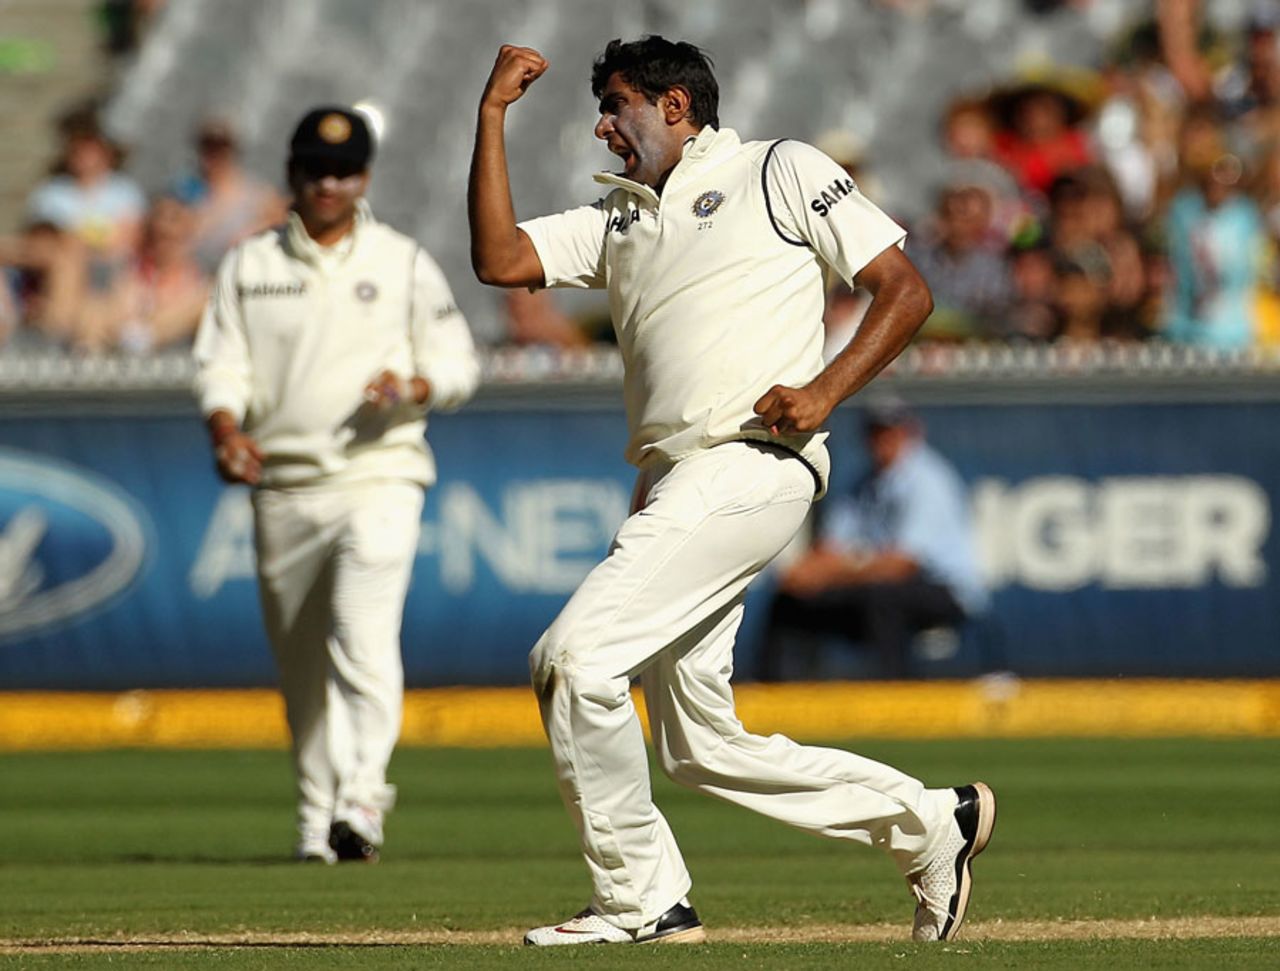 R Ashwin is pumped up after trapping Nathan Lyon lbw, Australia v India, 1st Test, Melbourne, 3rd day, December 28, 2011